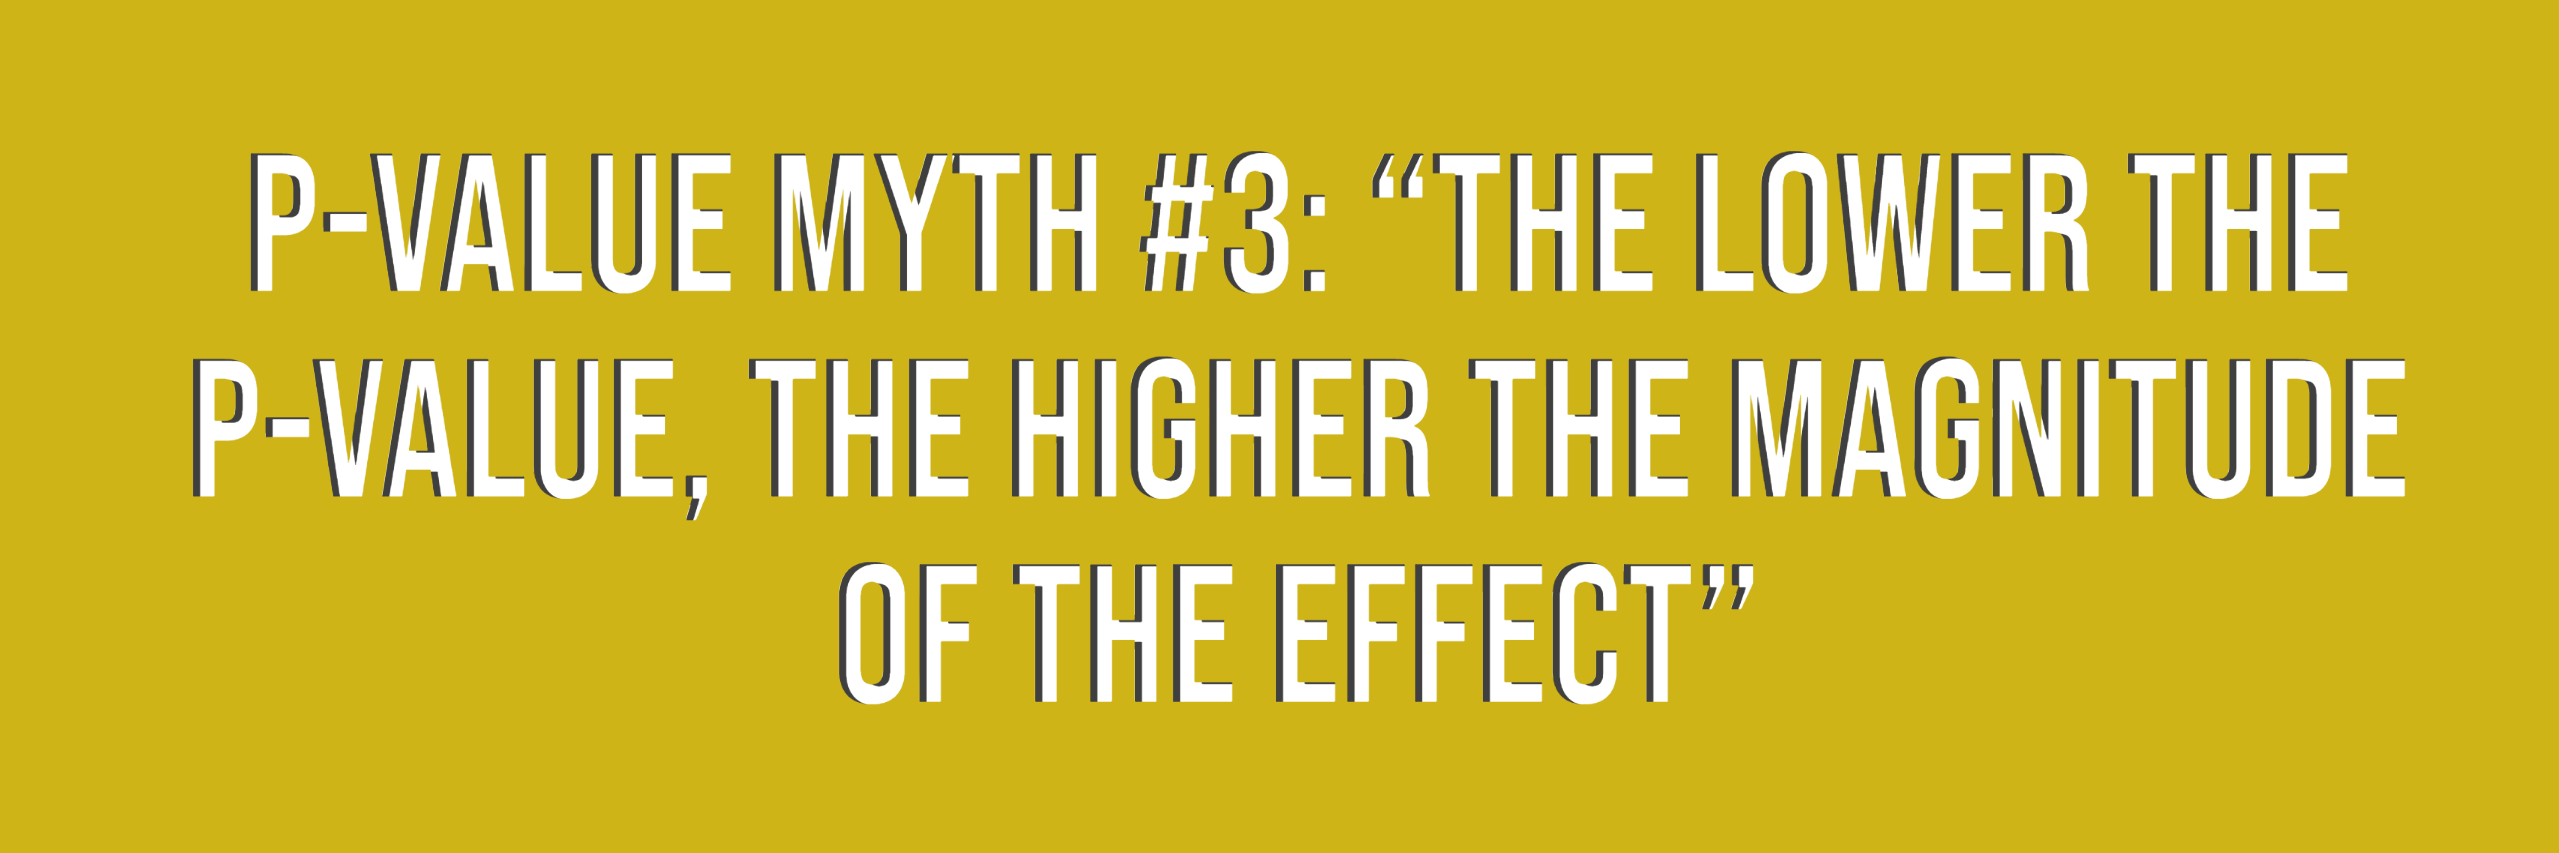 p value myth the lower the p value the higher the magnitude of the effect